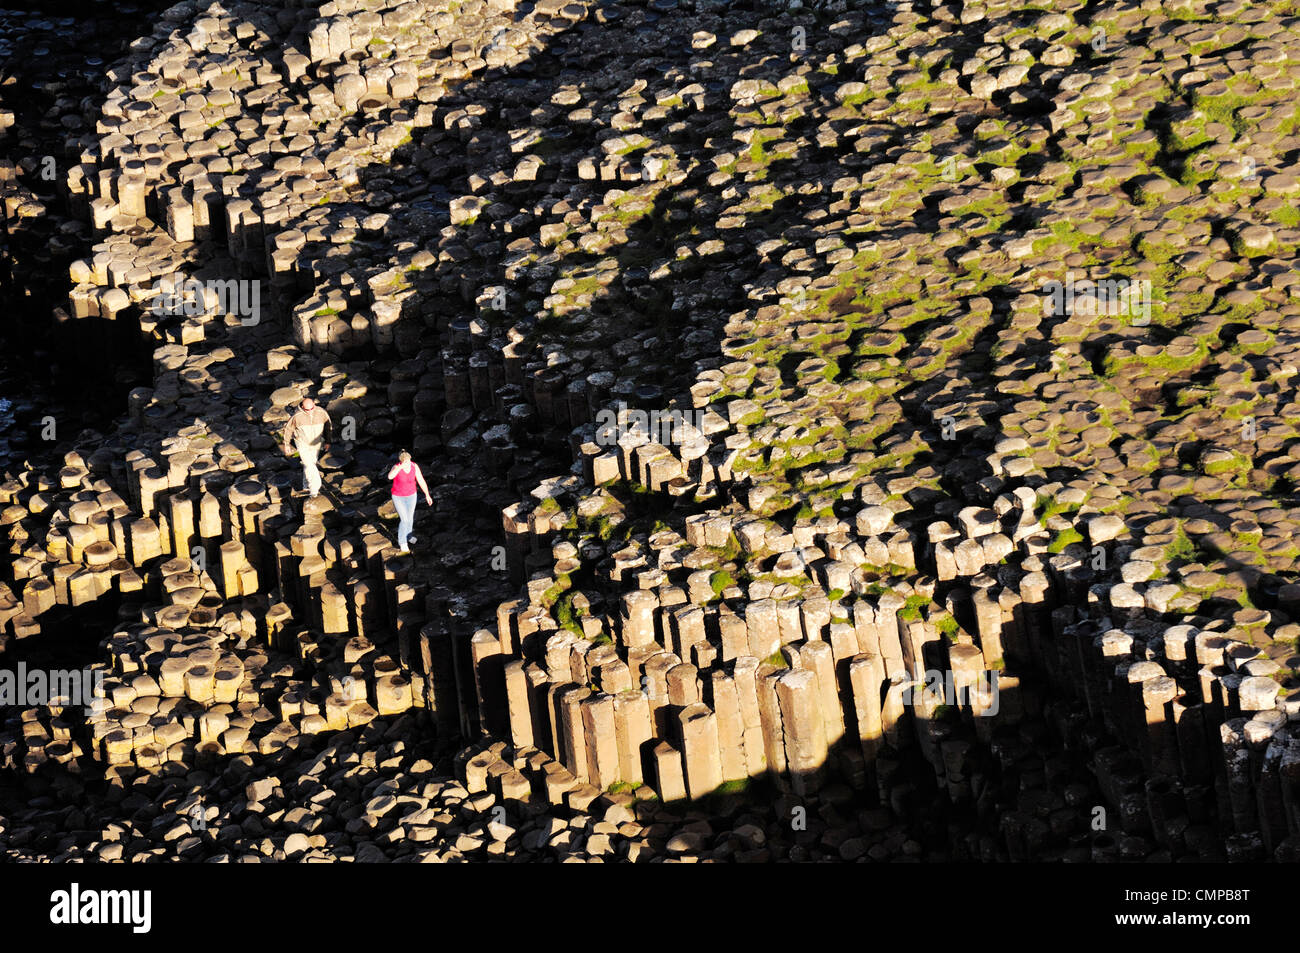 The Giants Causeway, Co. Antrim, Northern Ireland. Looking down from clifftop at hexagonal basalt columns of the Grand Causeway Stock Photo